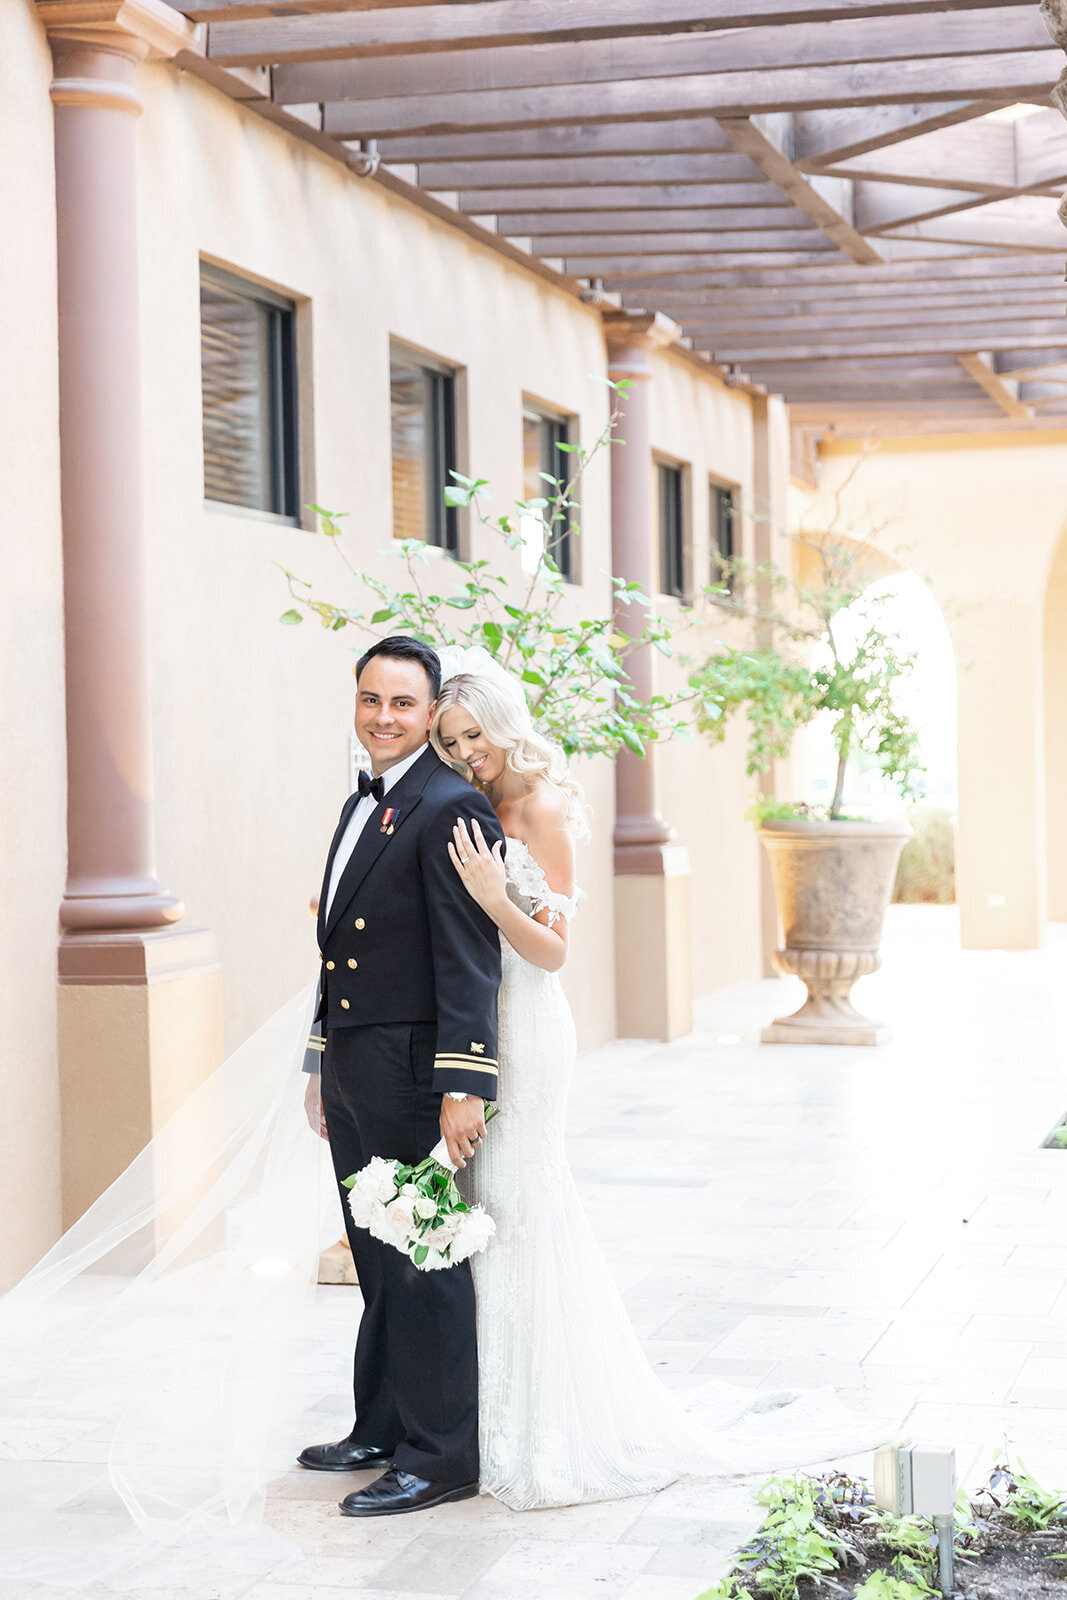 Karlie Colleen Photography - Holly & Ronnie Wedding - Seville Country Club - Gilbert Arizona-774